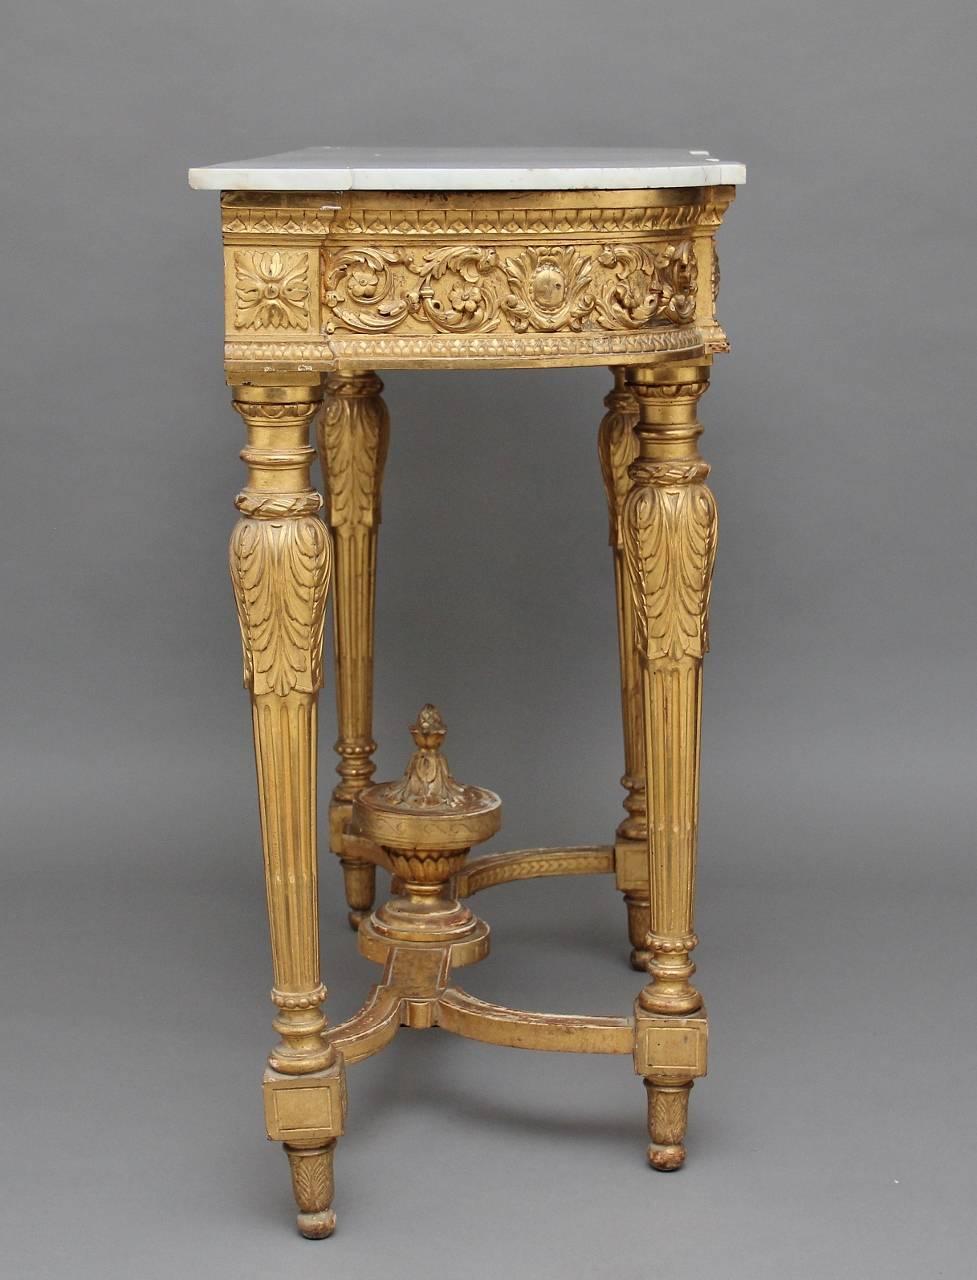 English 19th Century Gilt and Marble-Top Console Table